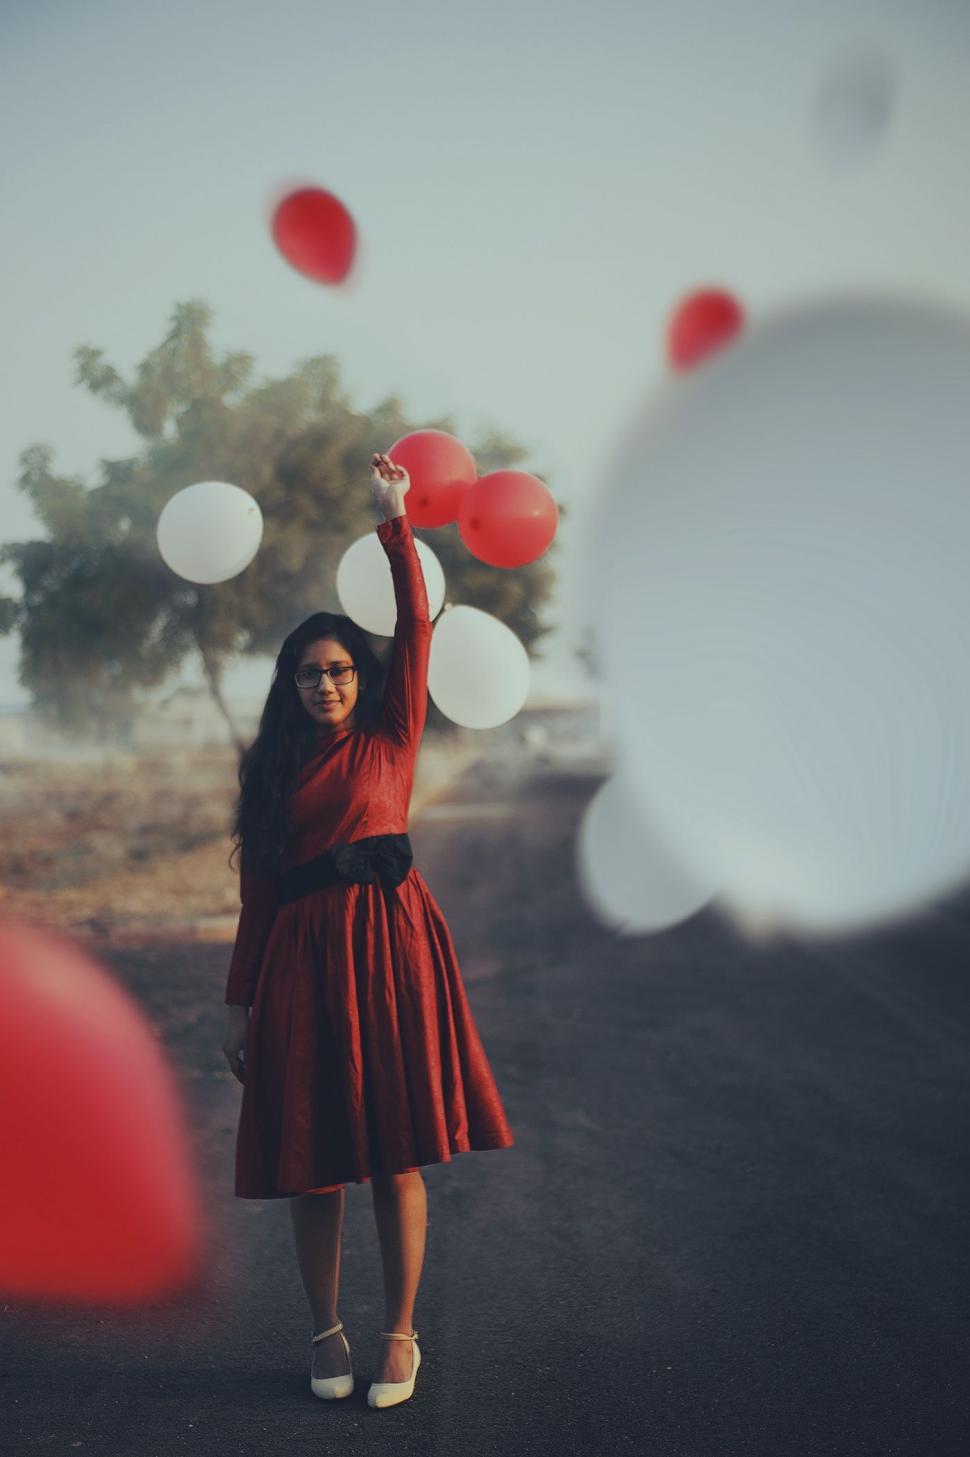 Free Image of Woman in Red Dress Holding Bunch of Balloons 